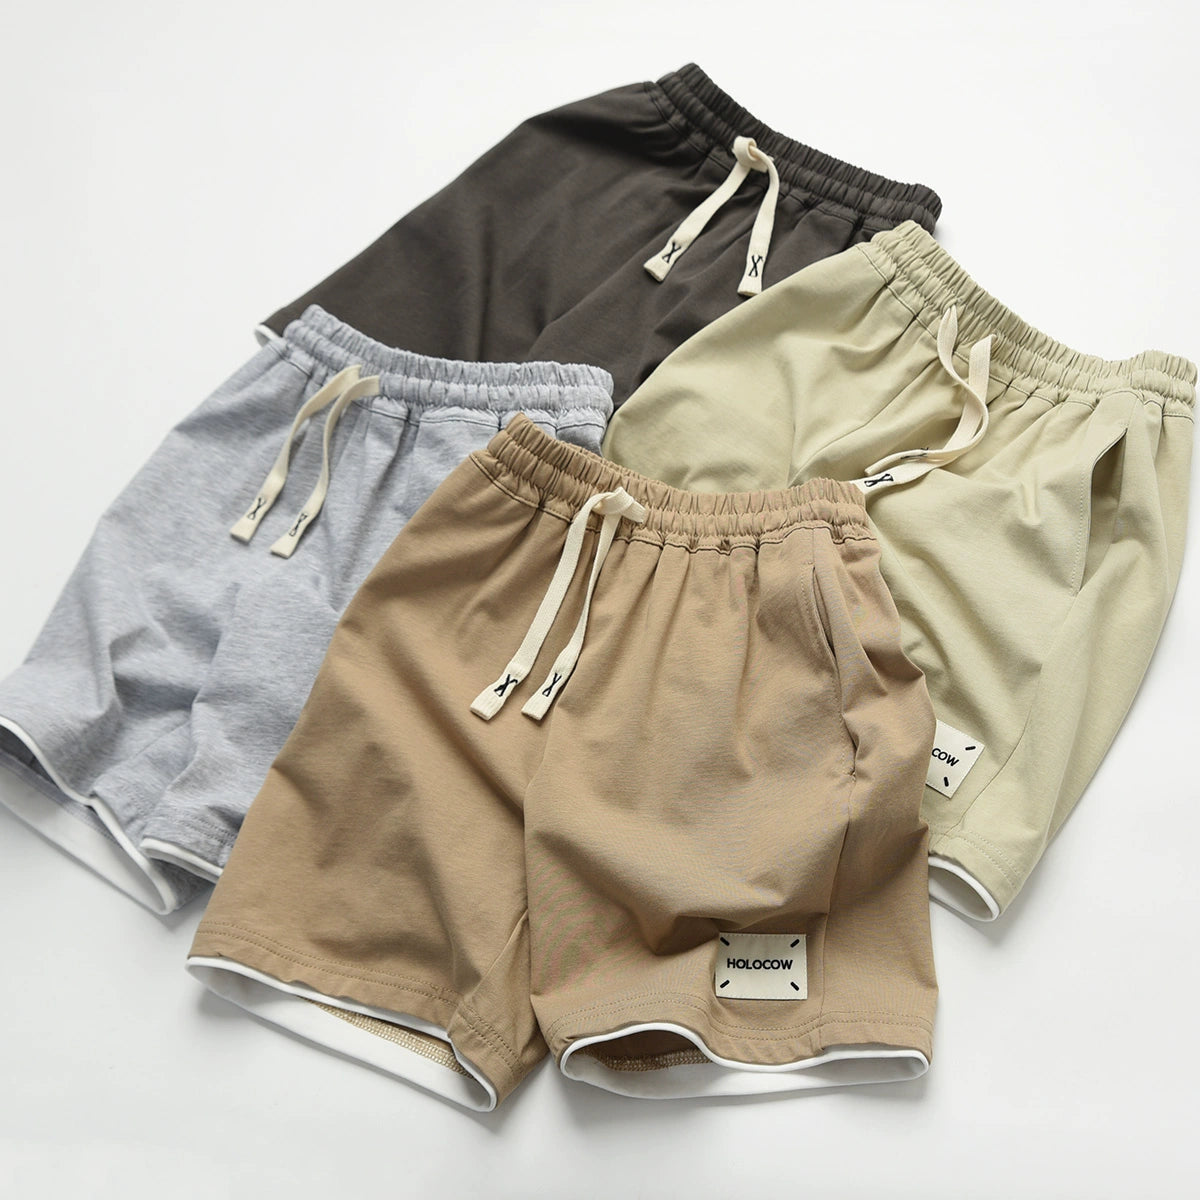 Boys' and Girls' shorts